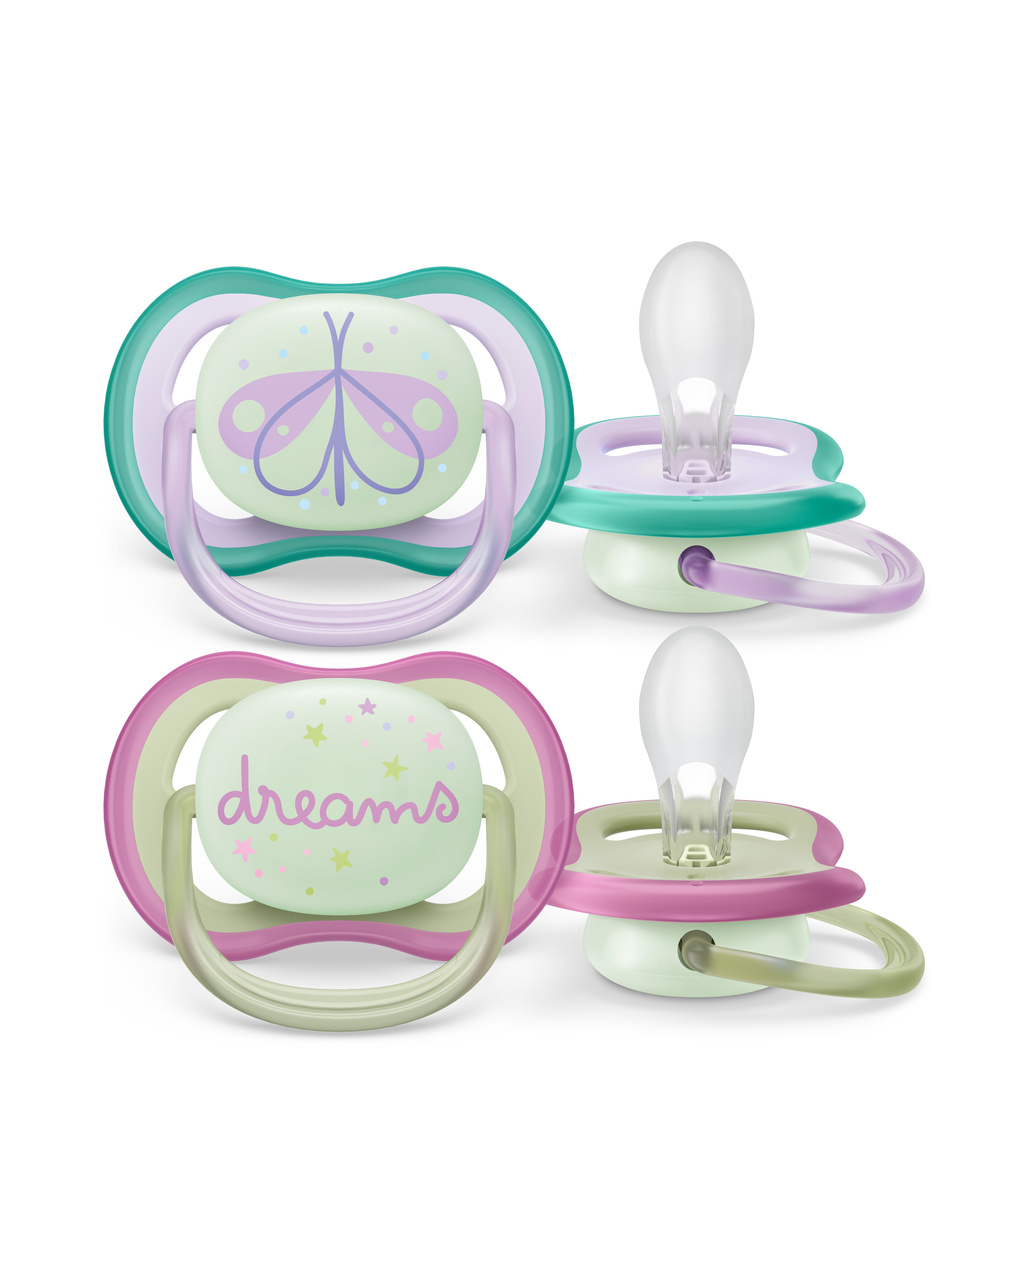 2 Chupetes Philips AVENT Ultra Air Decorados 0-6 Meses